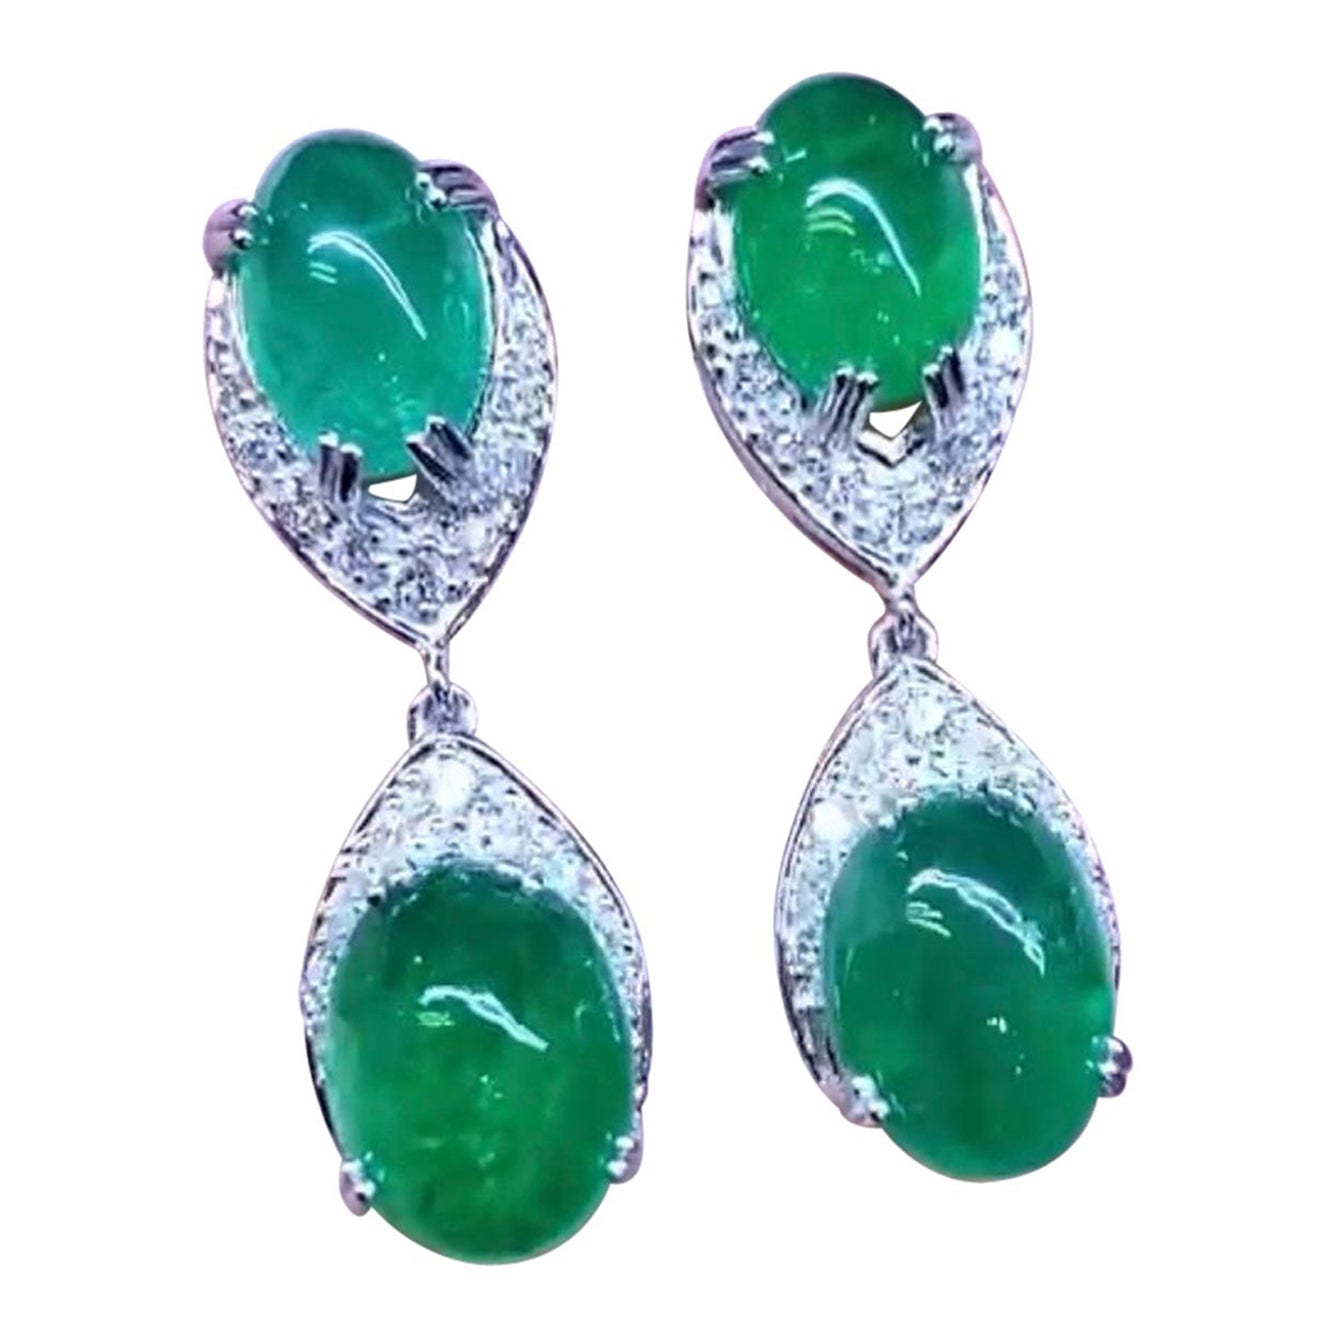 Stunning Ct 22, 30 of Zambia Emeralds and Diamonds on Earrings For Sale